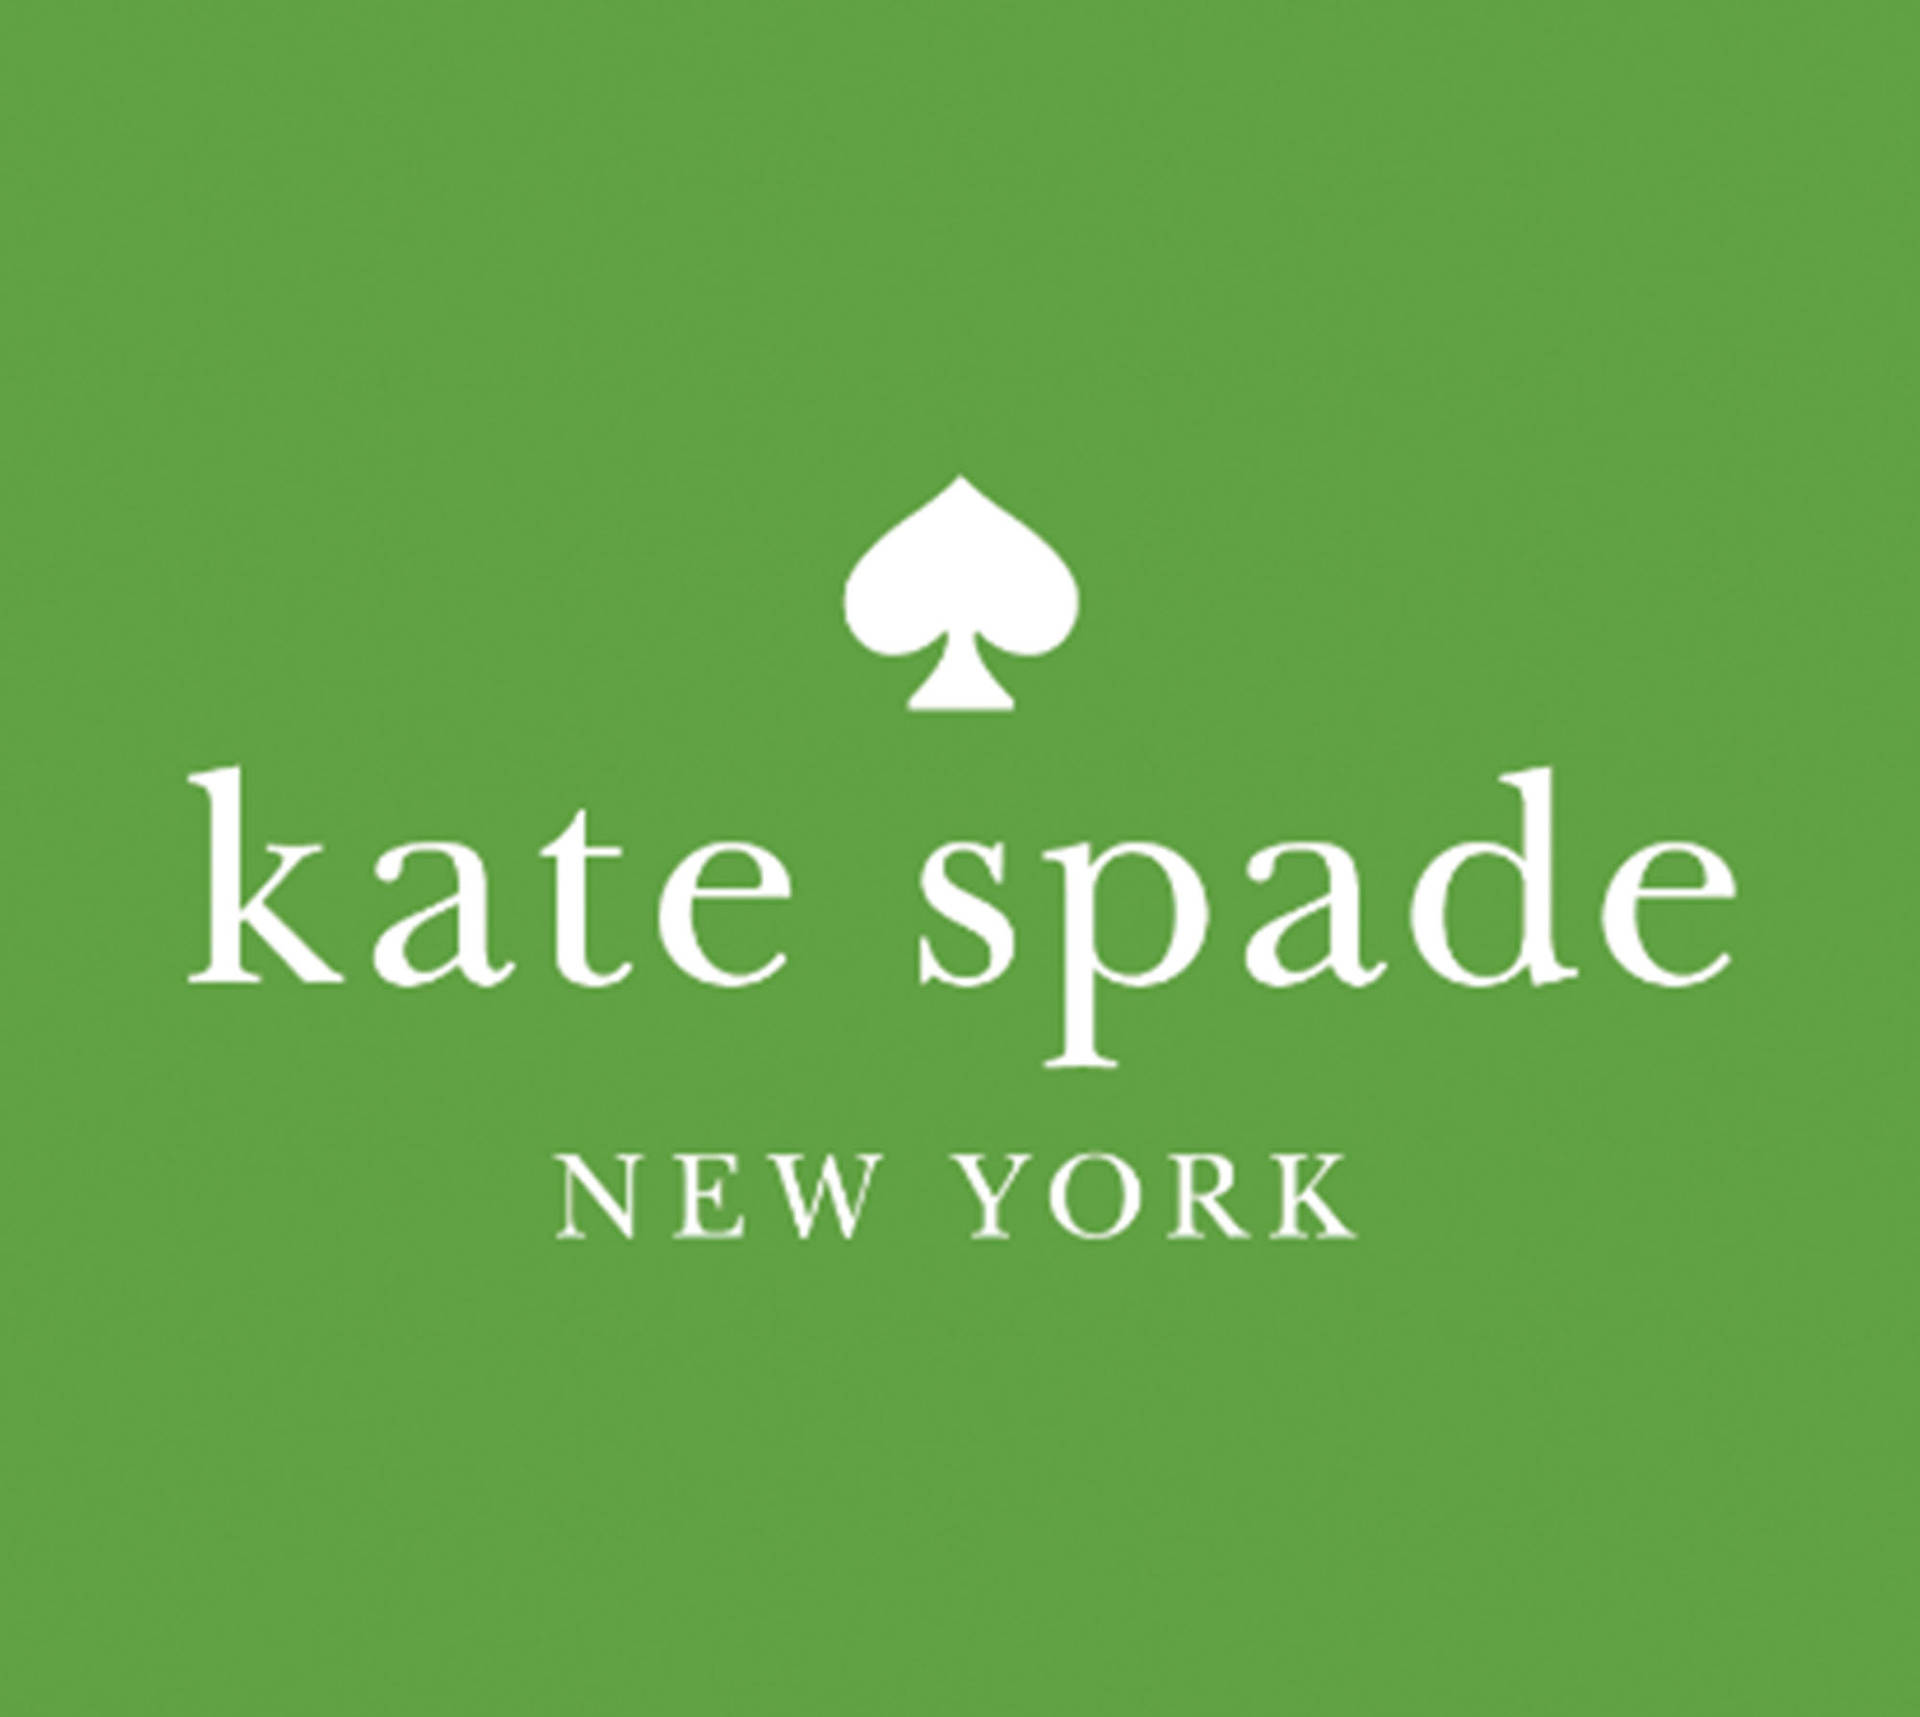 Kate Spade New York Green Poster Background